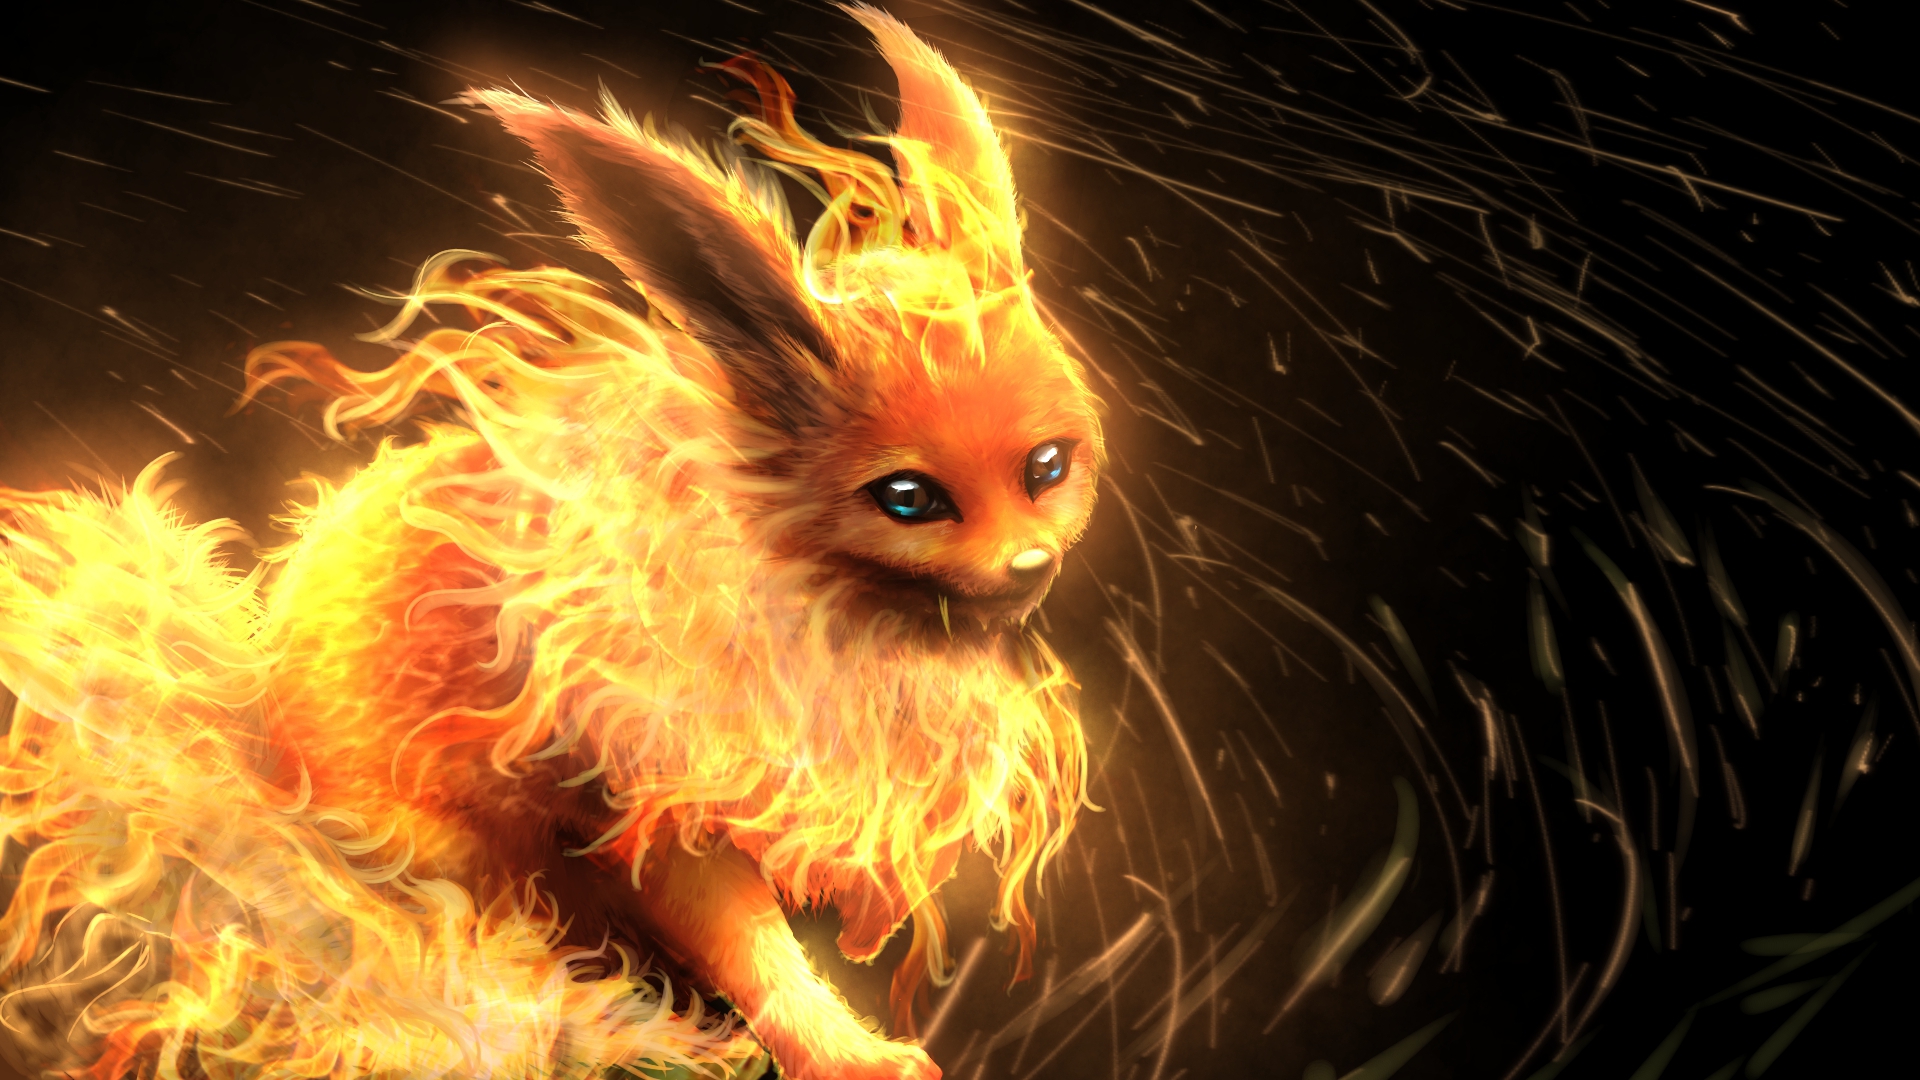 Flareon (Pokémon) HD Wallpaper and Background